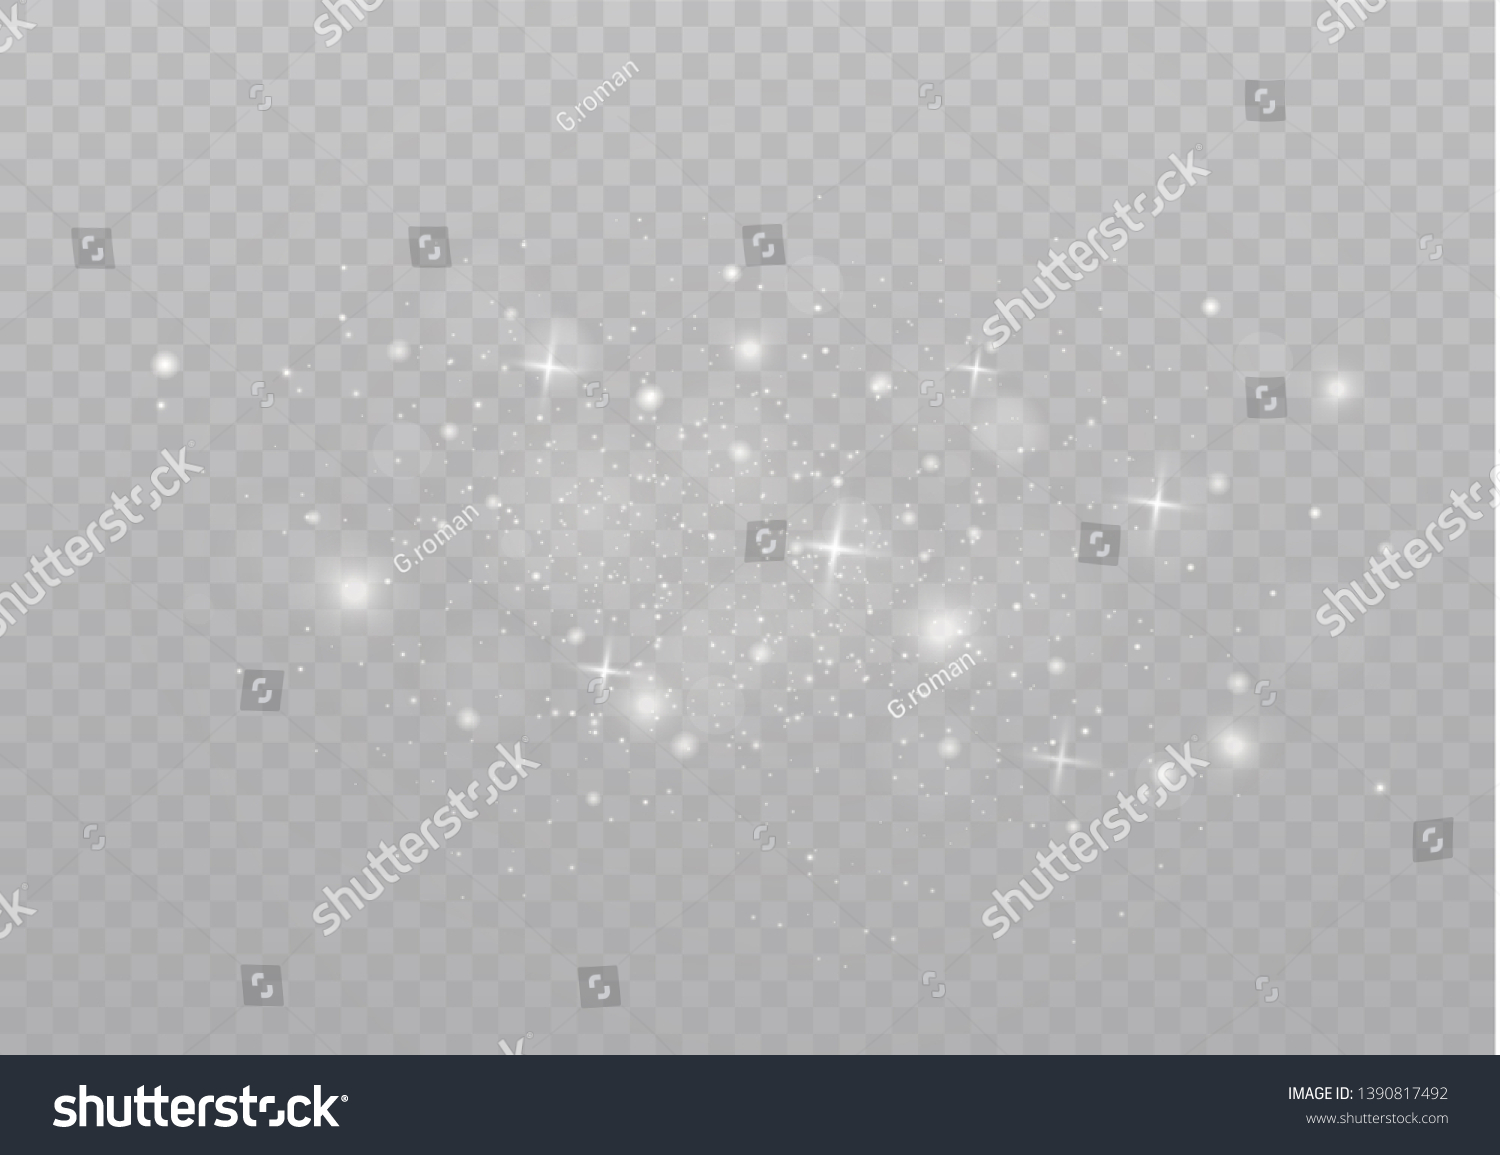 The dust sparks and golden stars shine with special light. Vector sparkles on a transparent background. Christmas light effect. Sparkling magical dust particles. #1390817492